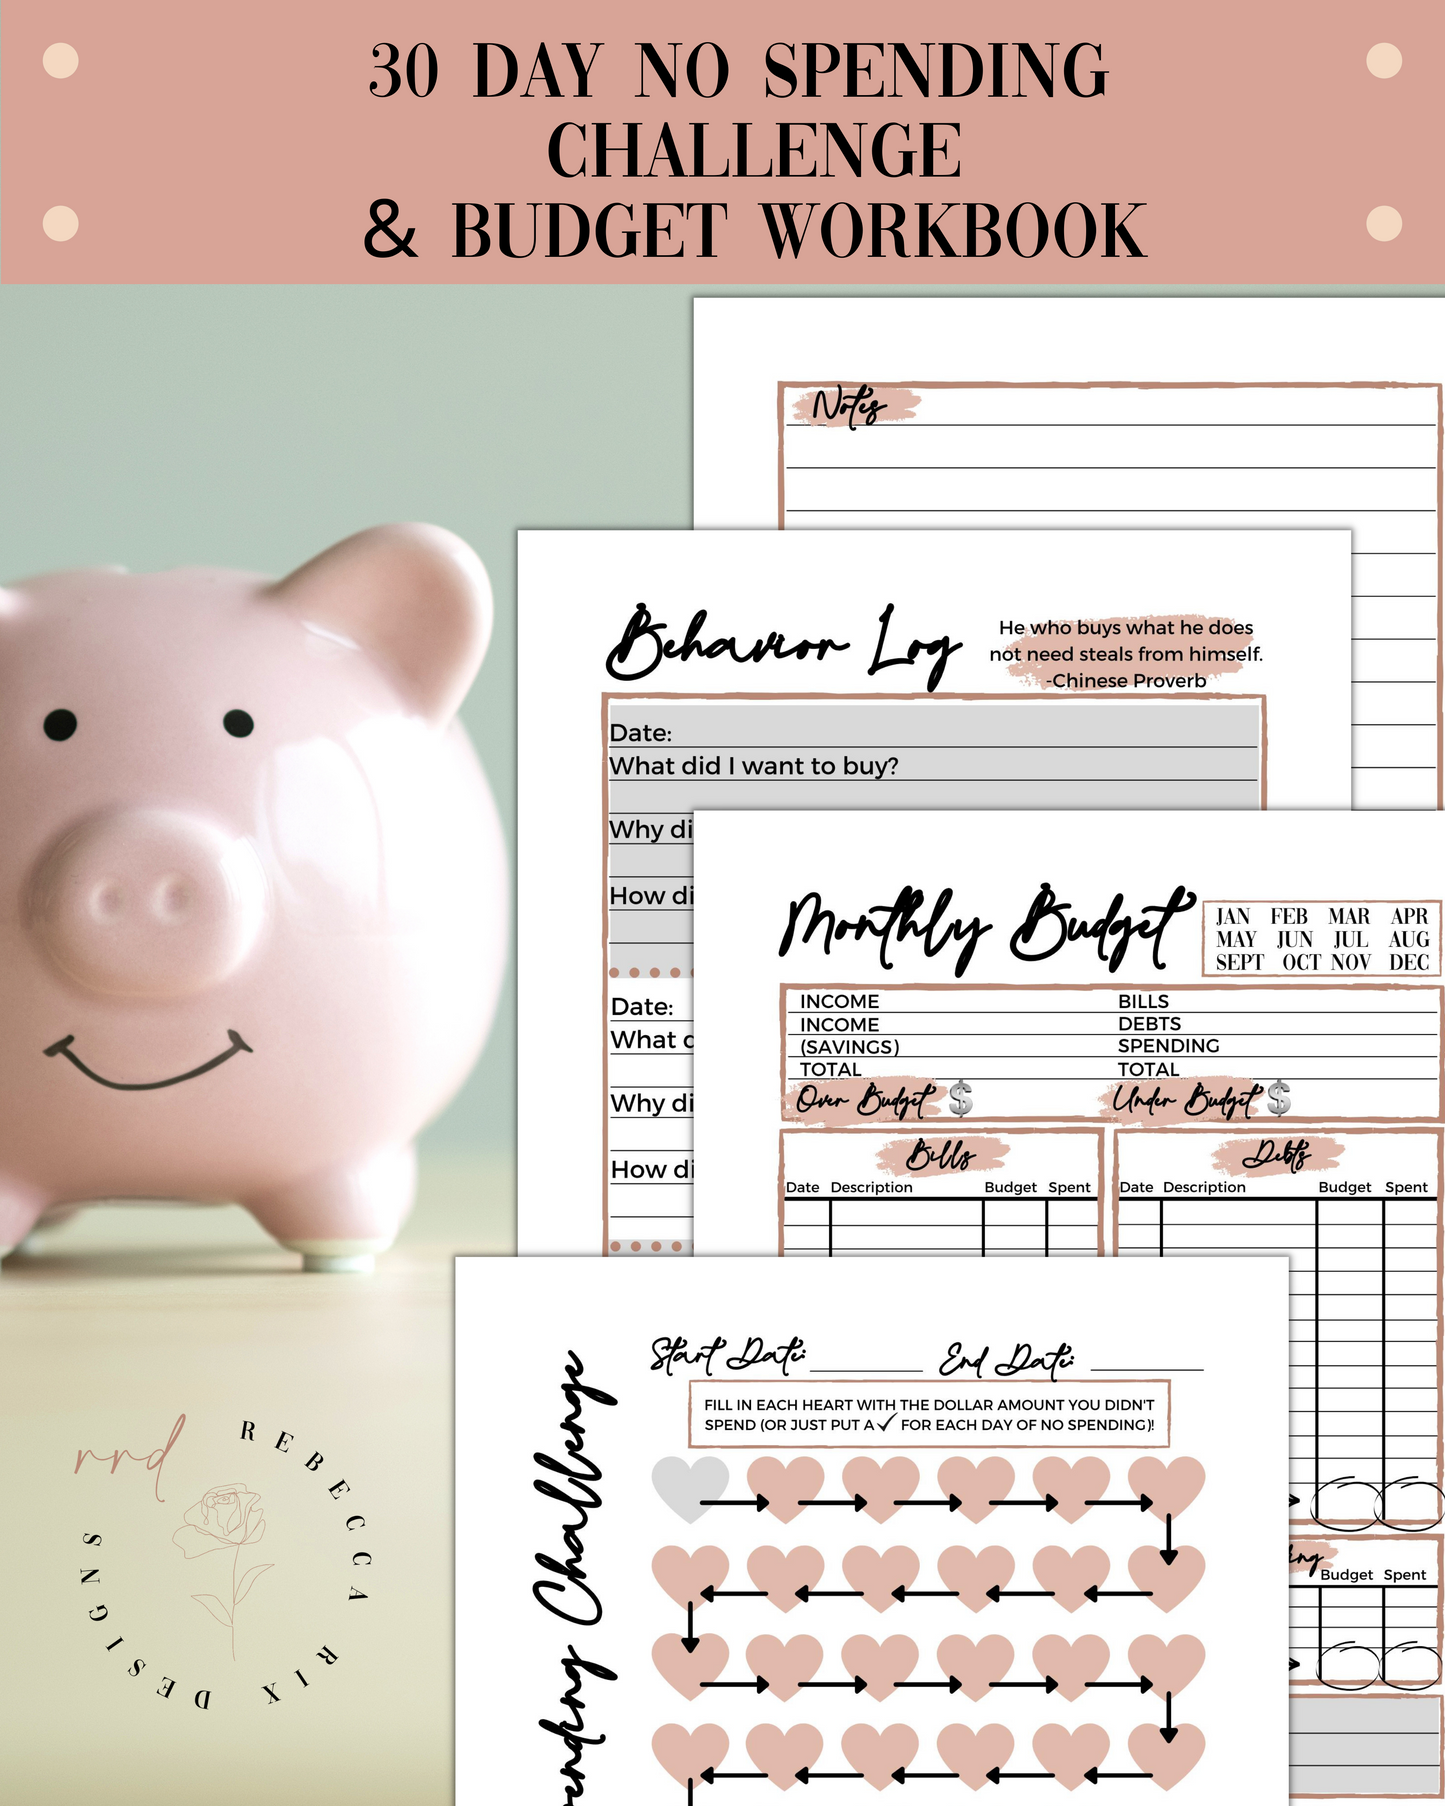 30 Day No Spending Challenge & Budgeting Workbook, Printable Planners & Organizers